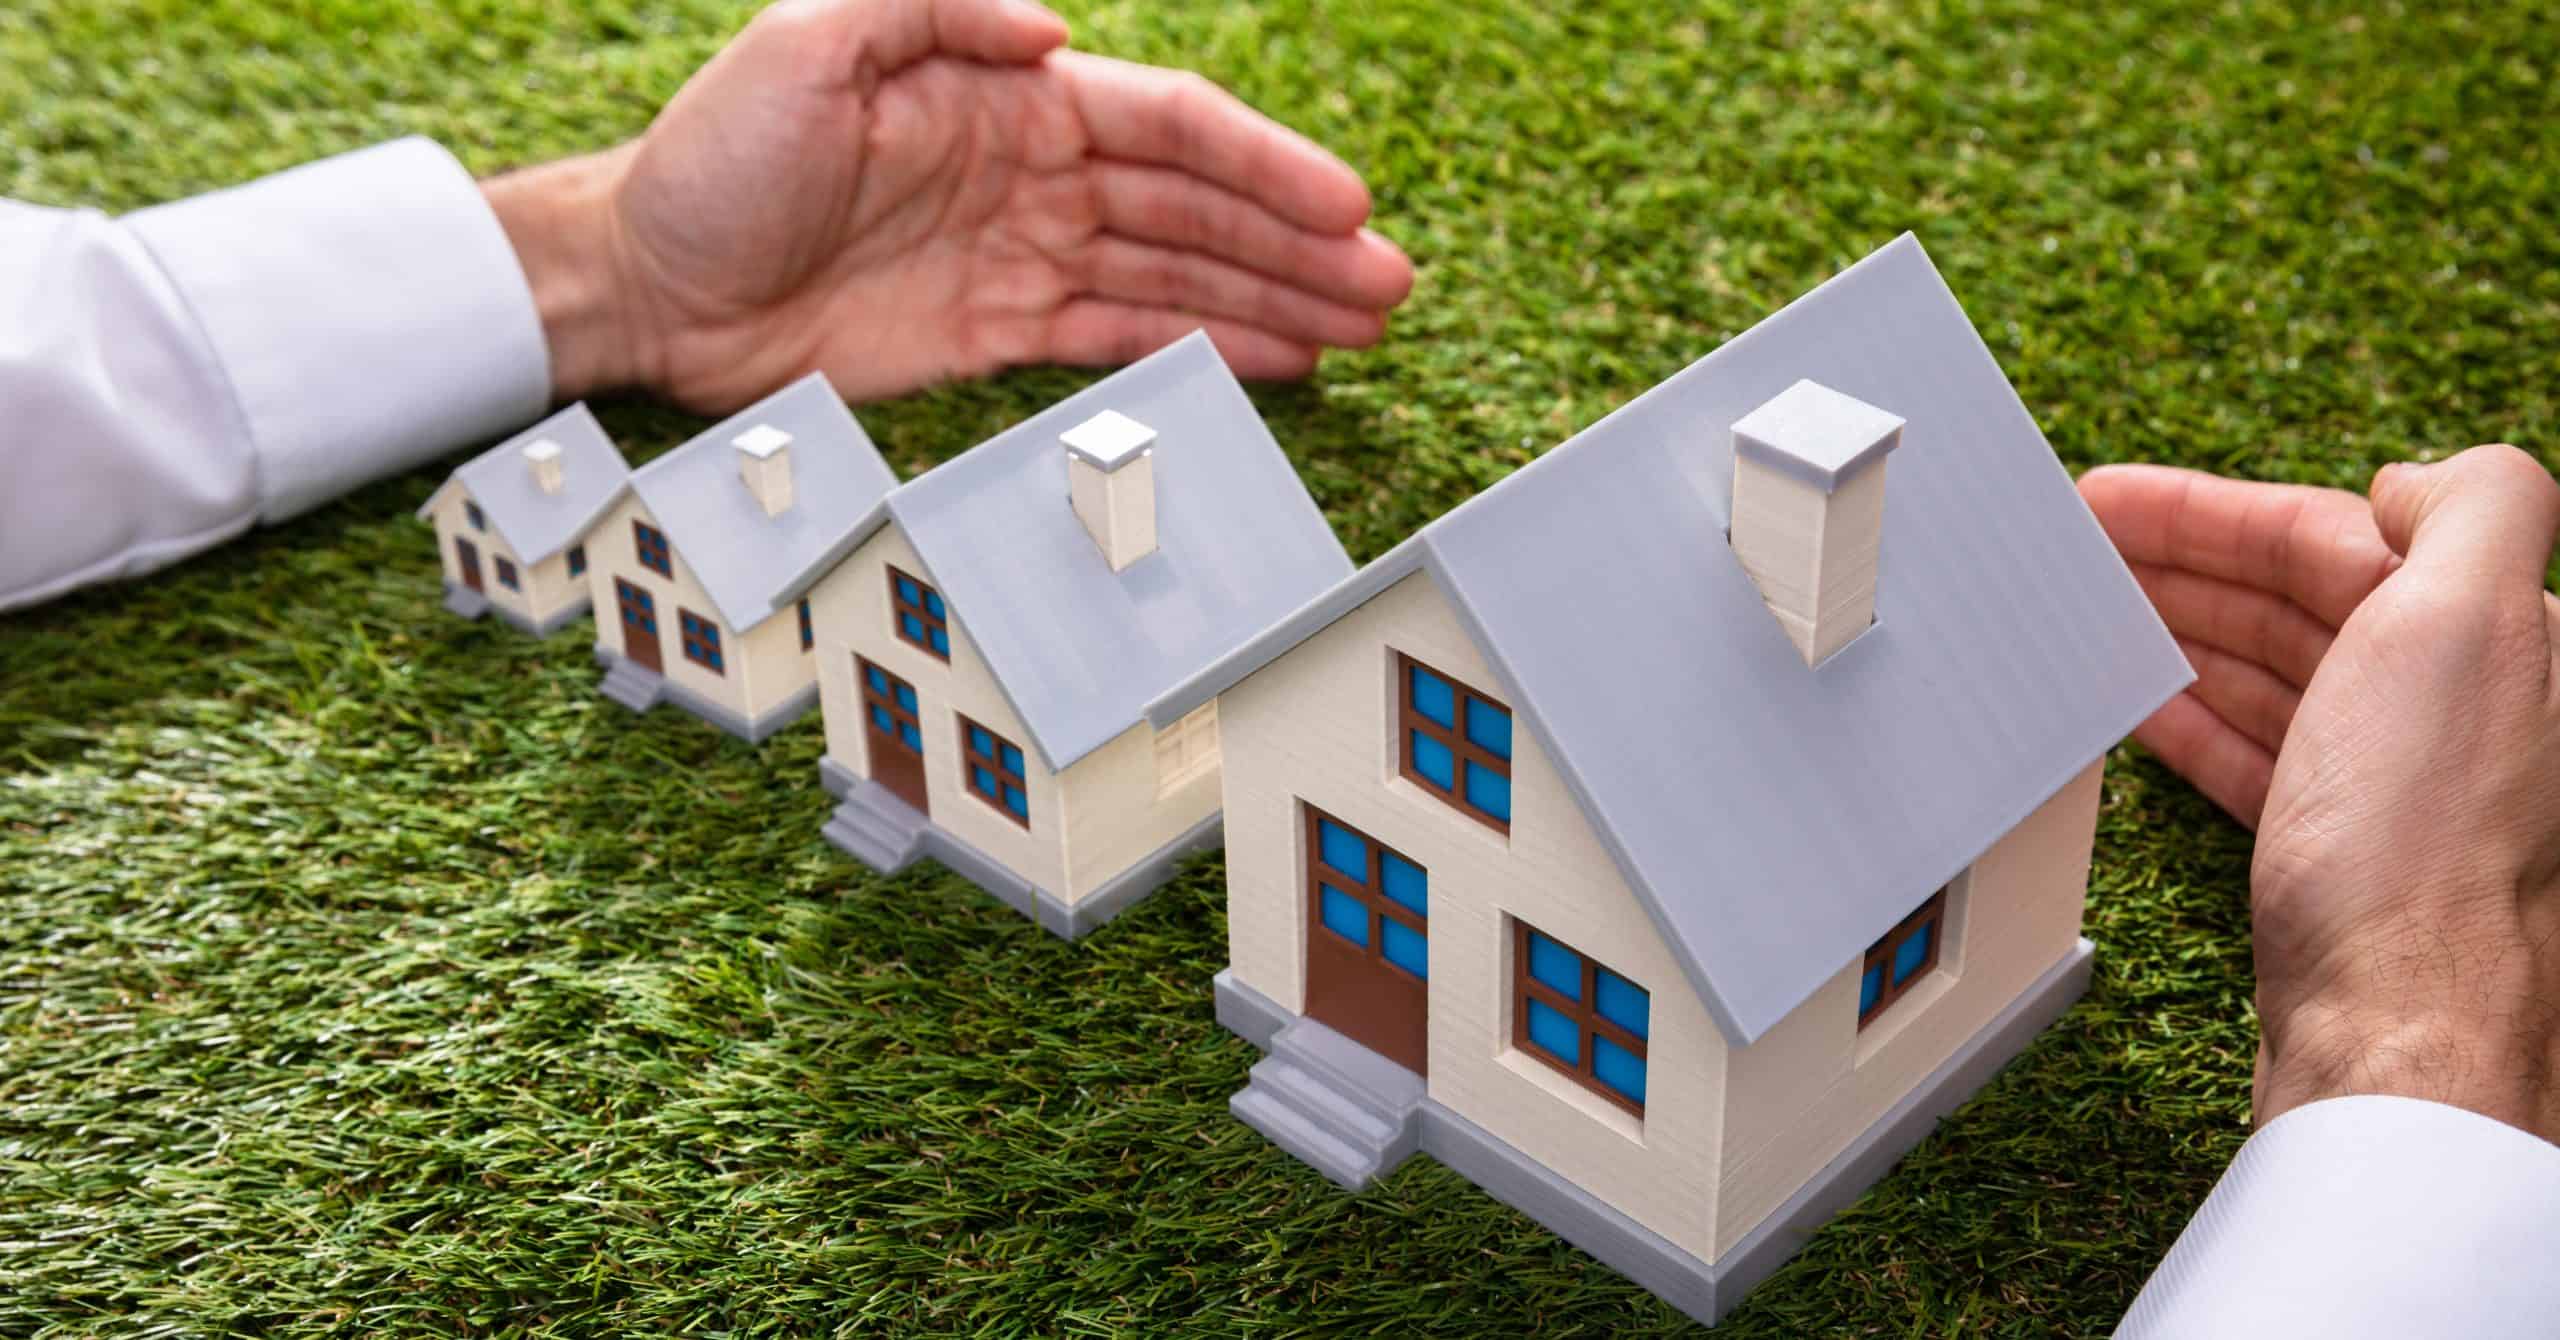 Man's hands protecting growing home sizes